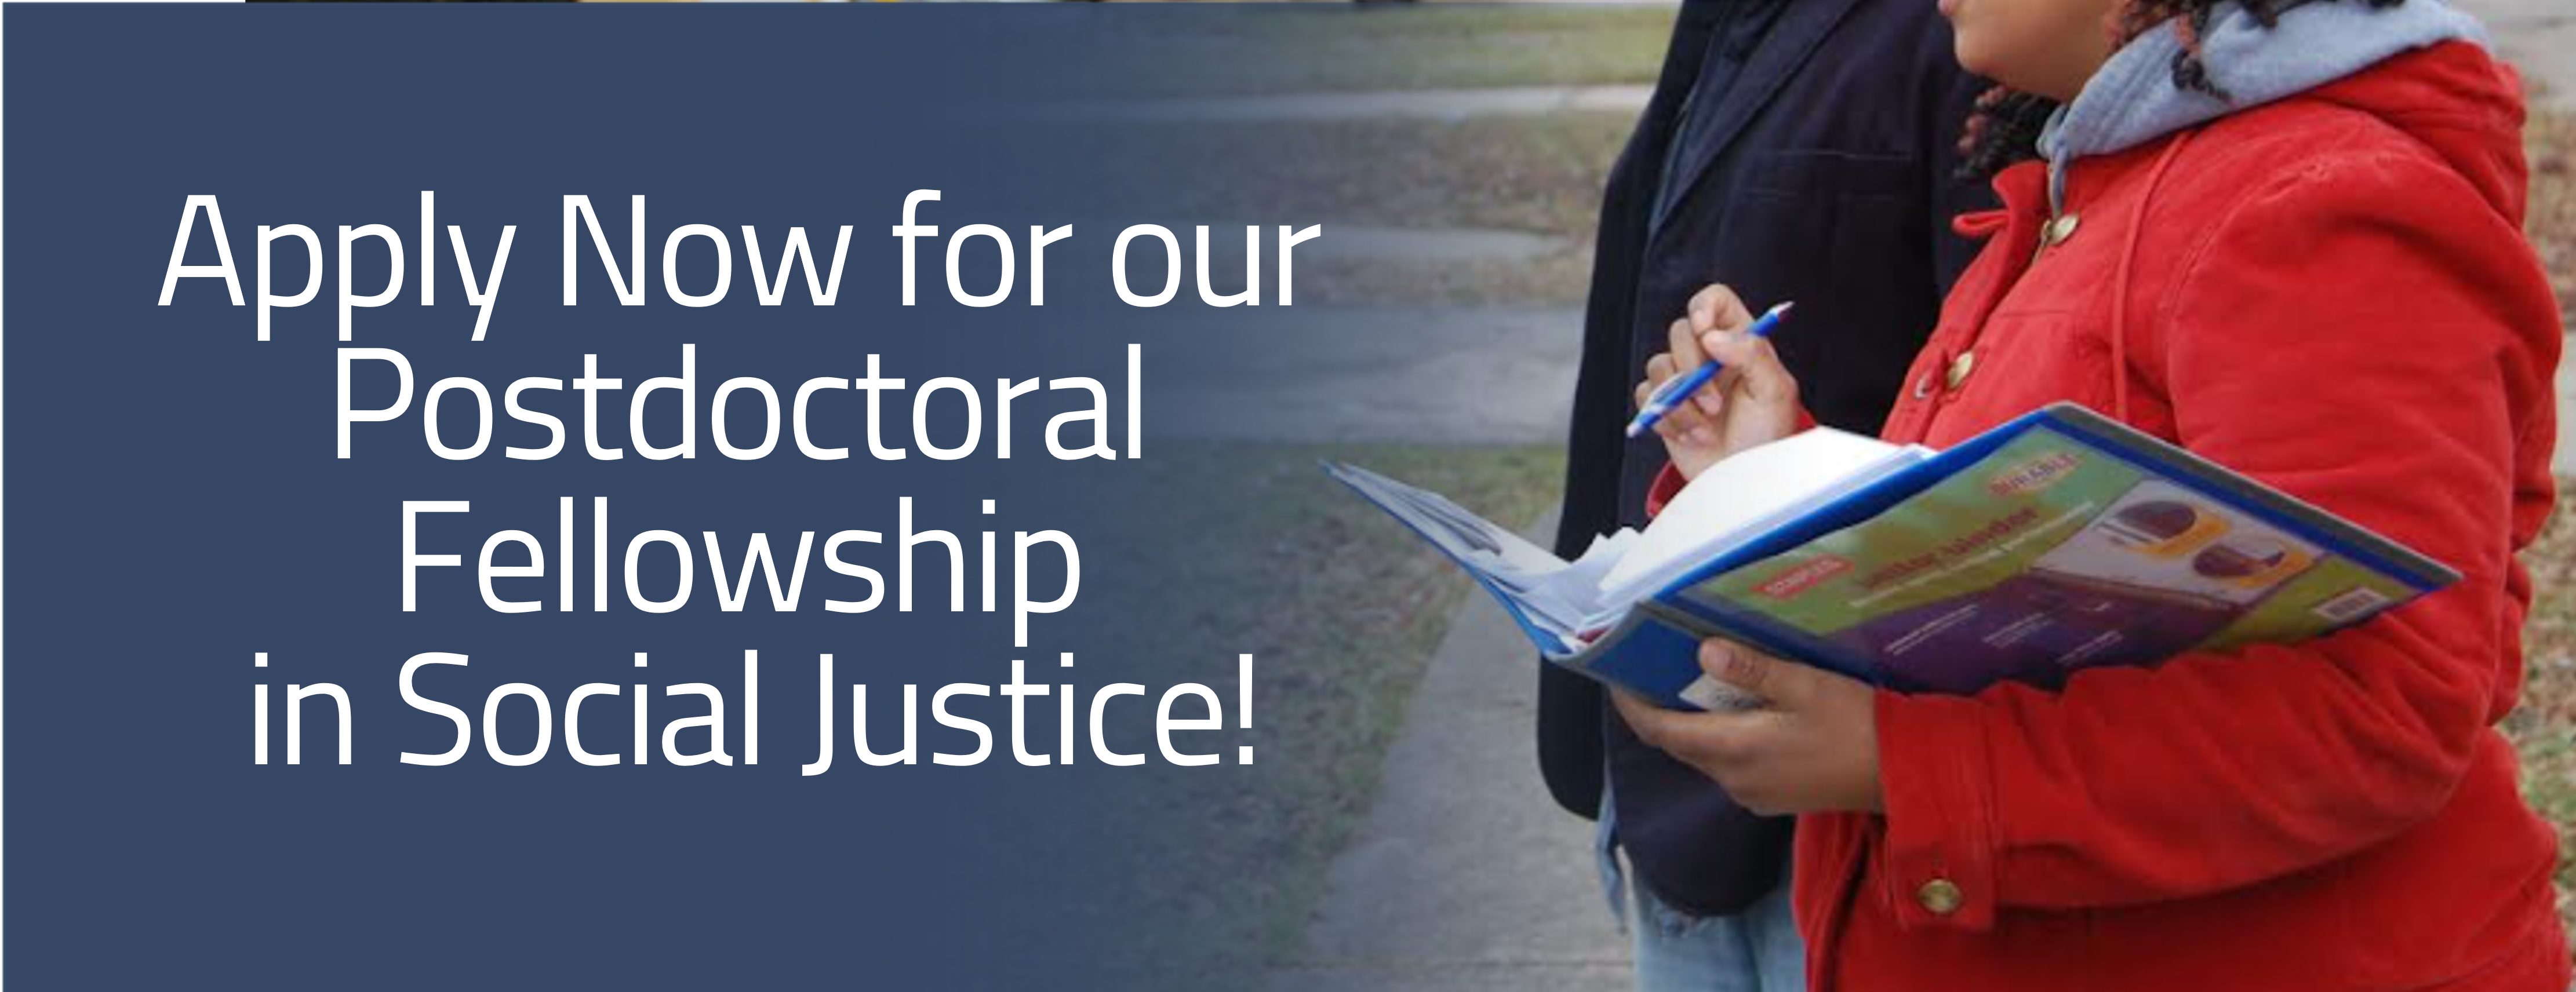 Text: apply now for our postdoctoral fellowship in social justice! Image: two people, one in a black jacket and one in a red jacket, stand with an open binder, administering a survey to a neighborhood resident